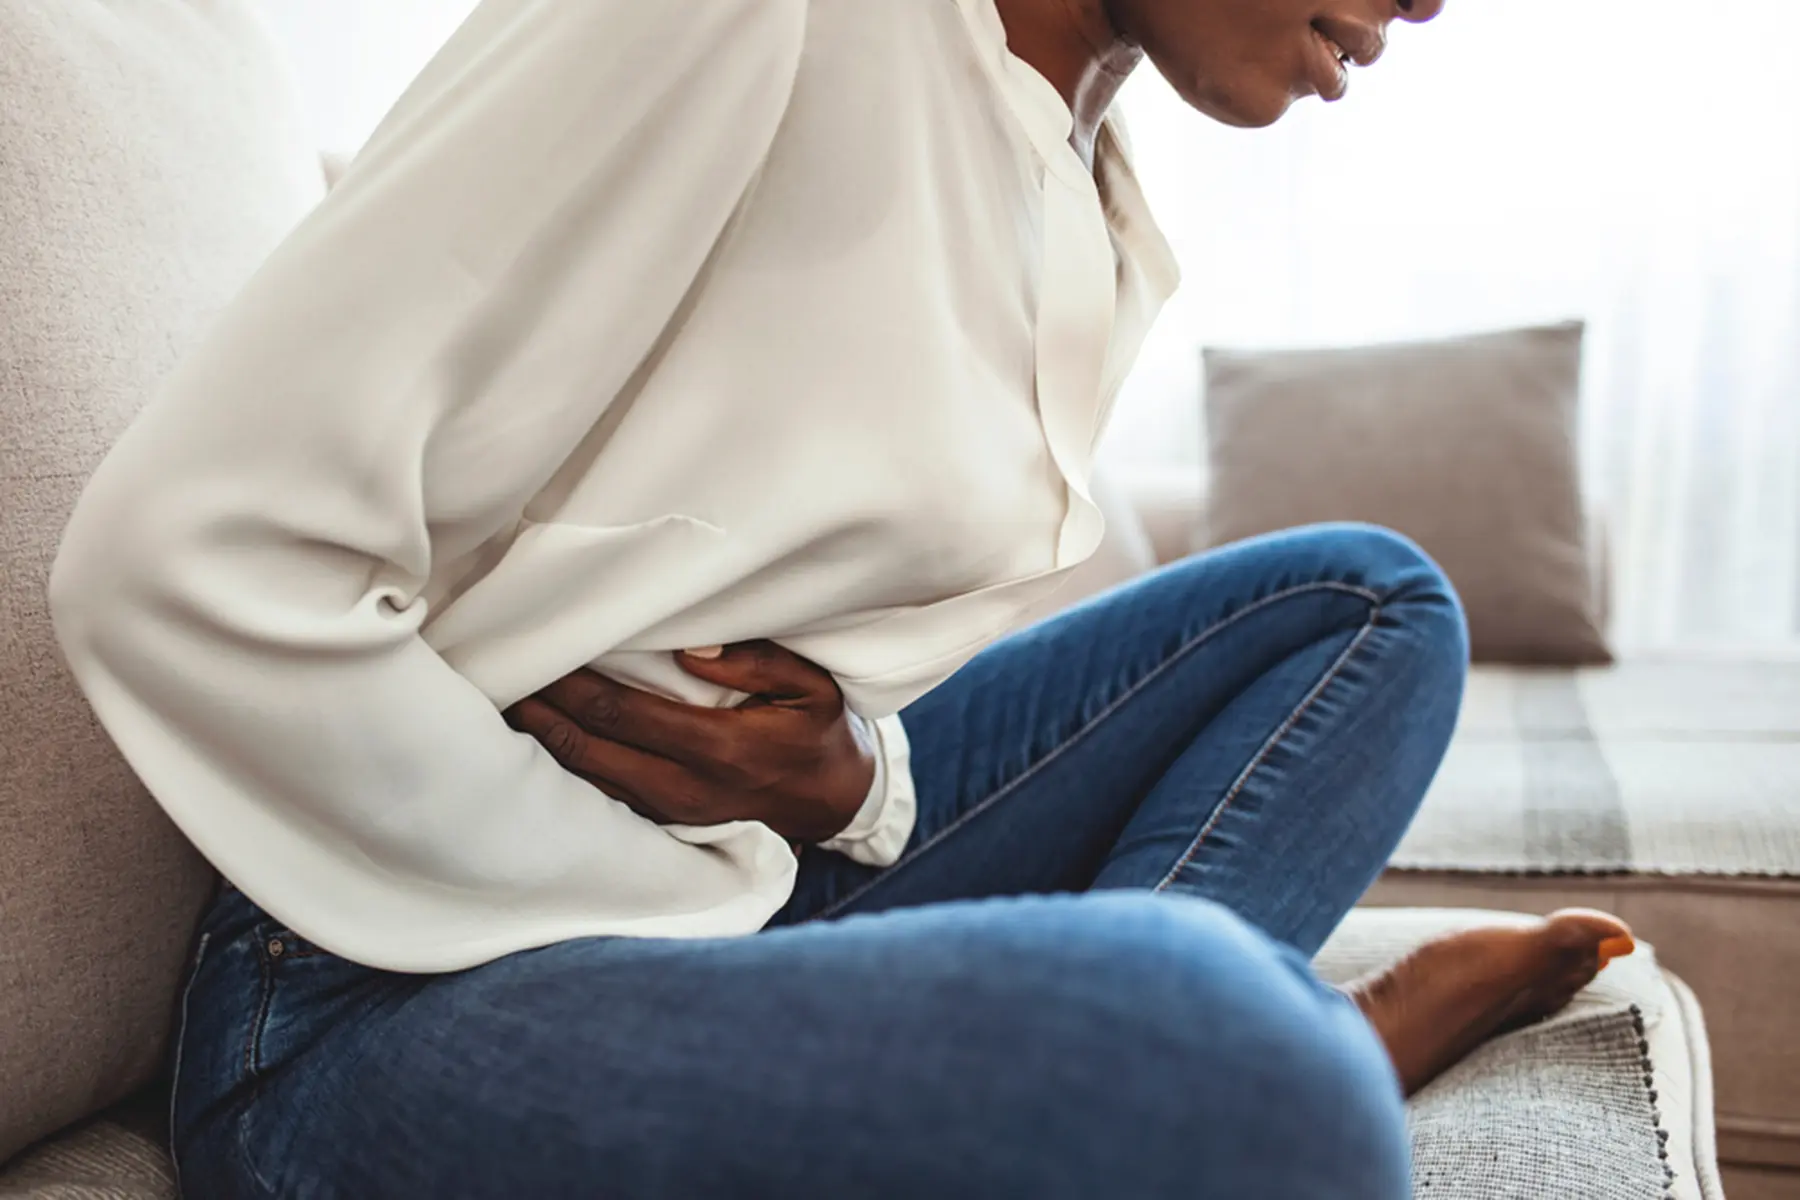 A woman sitting on a couch is doubled over in pain, clutching her stomach.